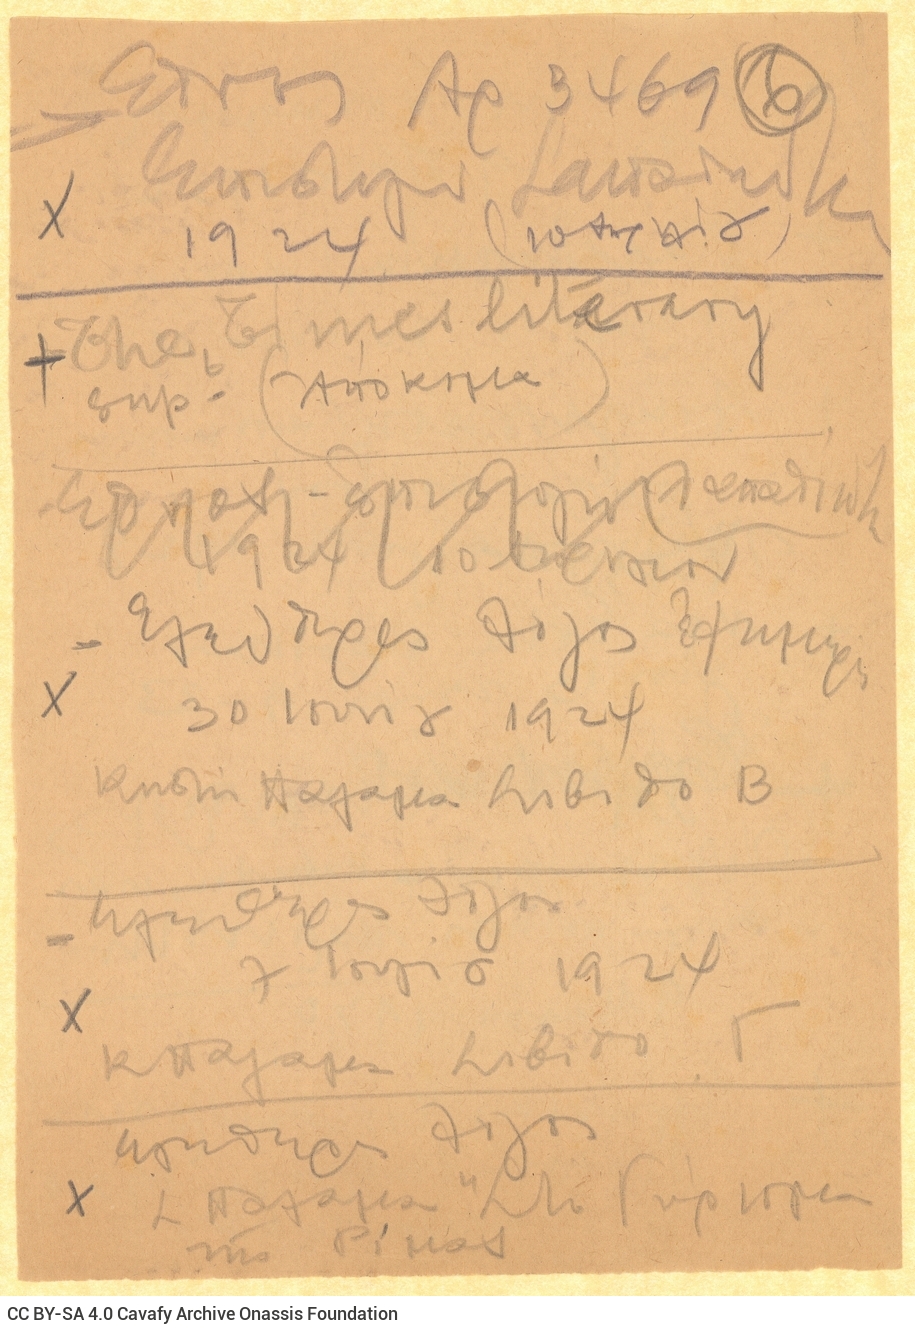 Handwritten list of books and periodicals, entitled "Taken by Peridis" and written on twelve sheets; they are all numbered at